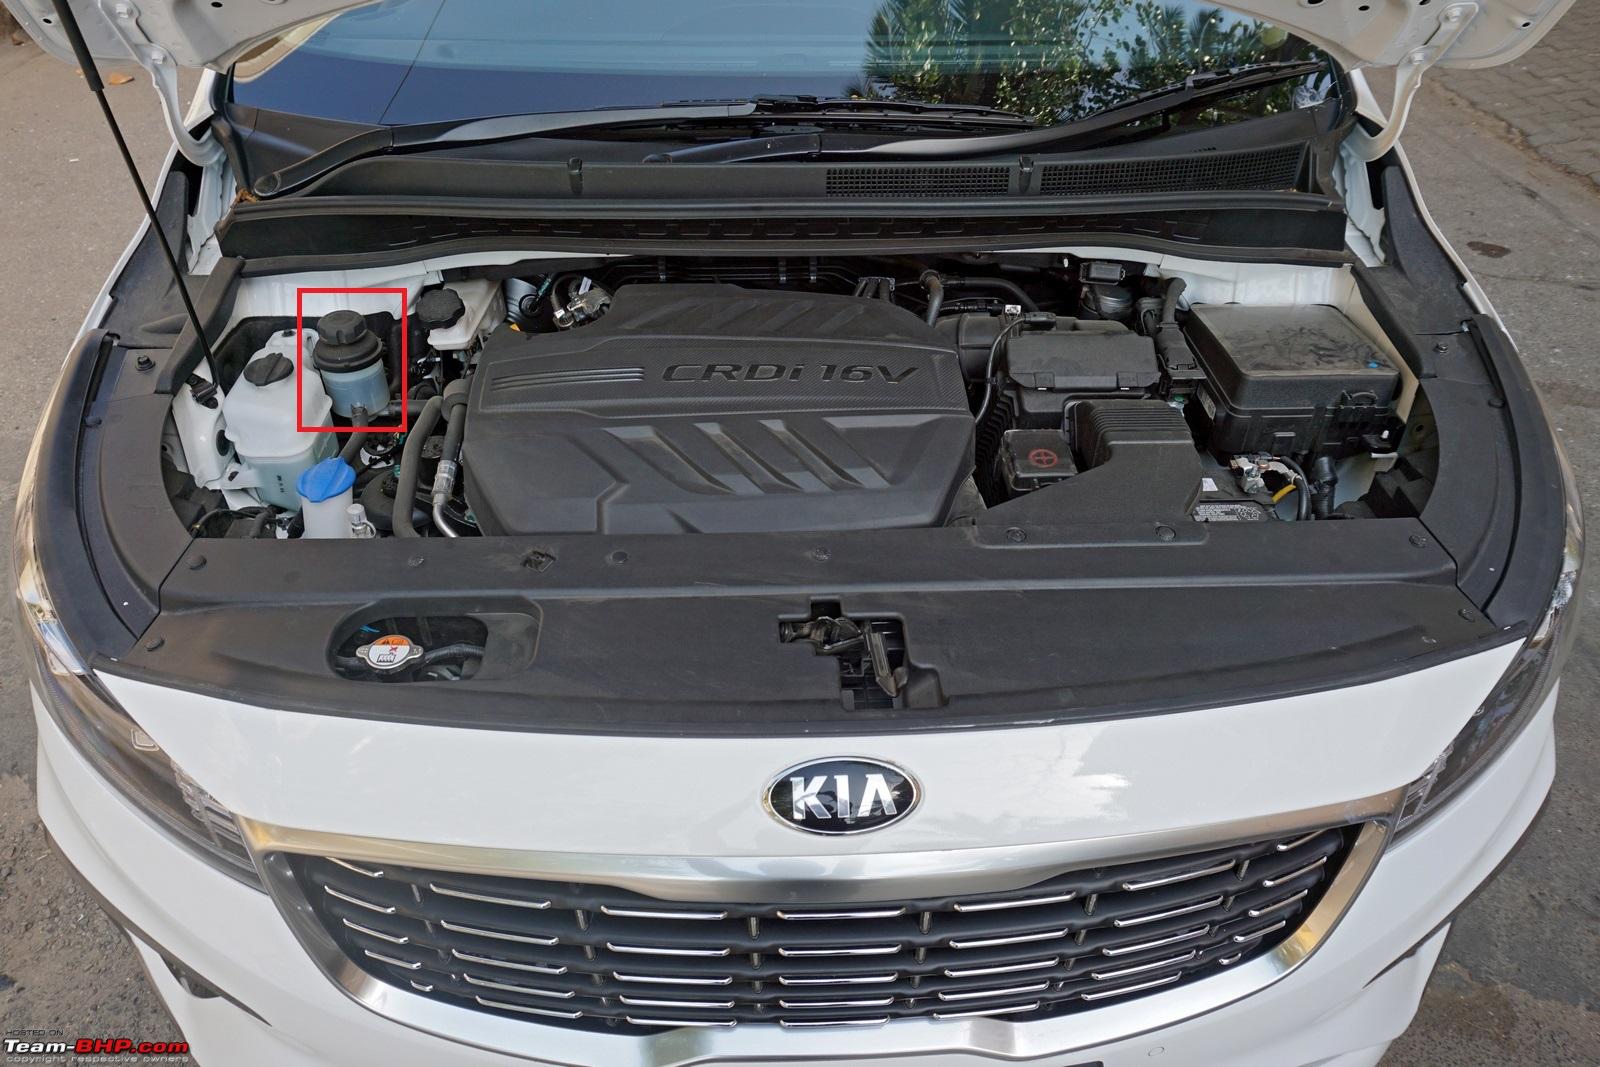 Kia Carnival : Official Review - Page 4 - Team-BHP